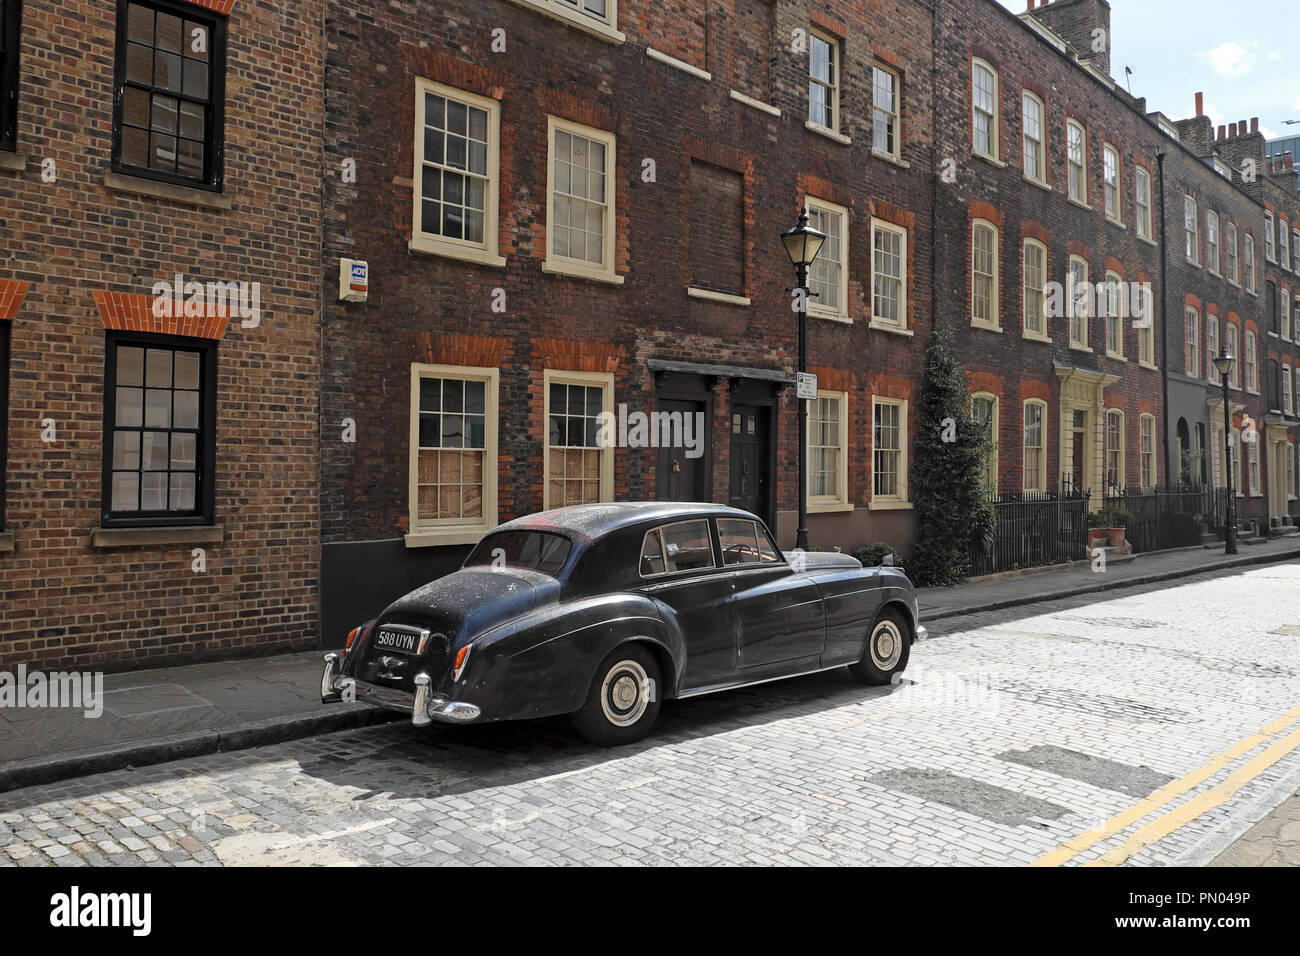 Classic vintage black 1950s Bentley car parked outside row of terraced ...